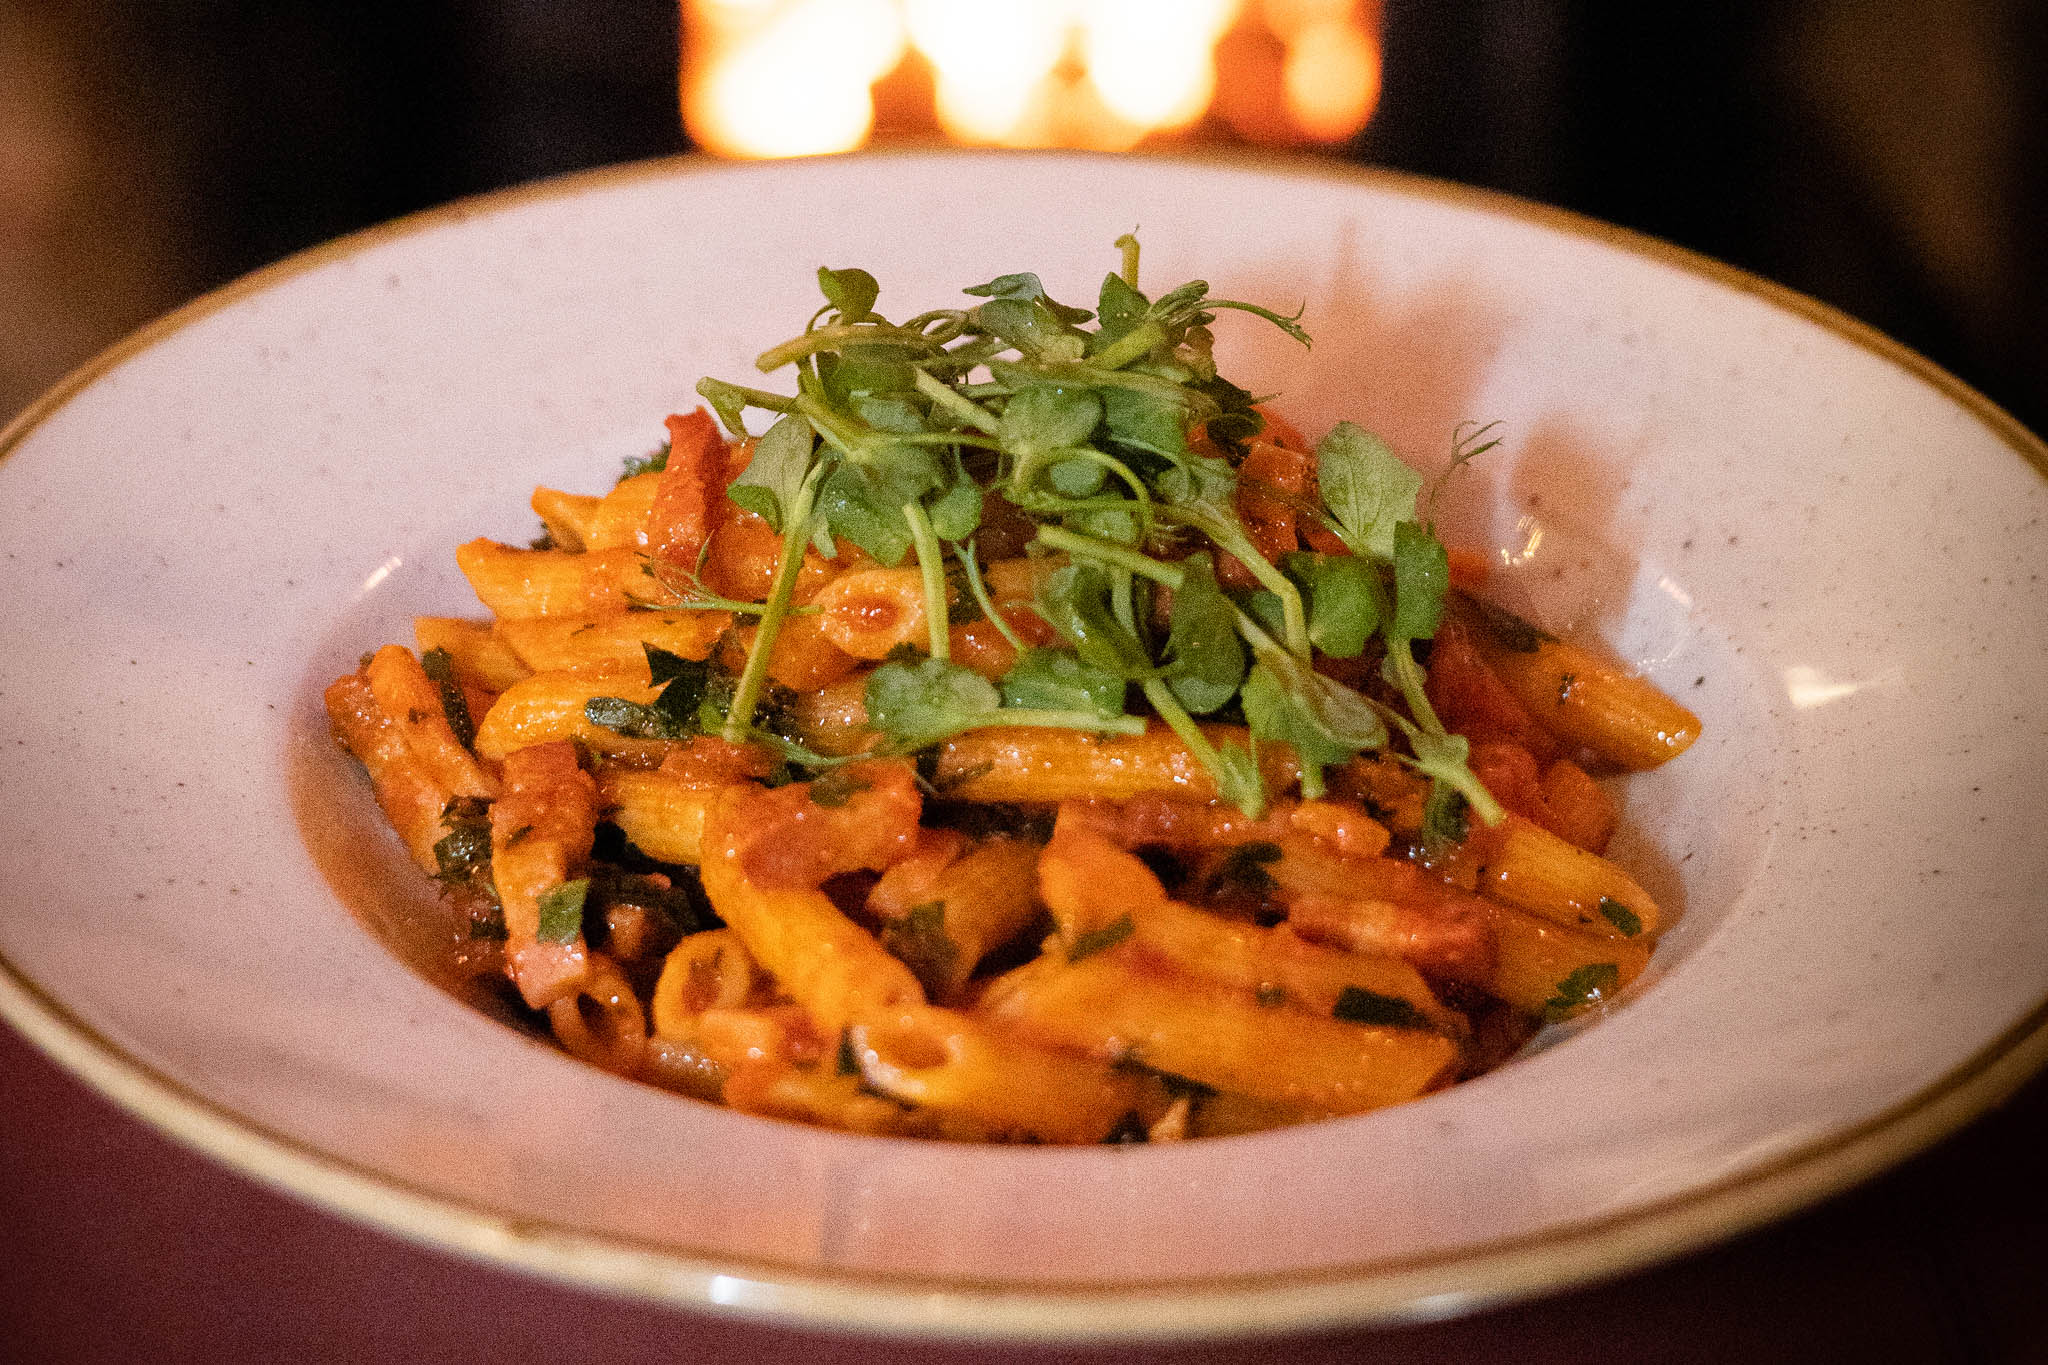 A beautiful traditional pasta dish served with a topping of fresh cress